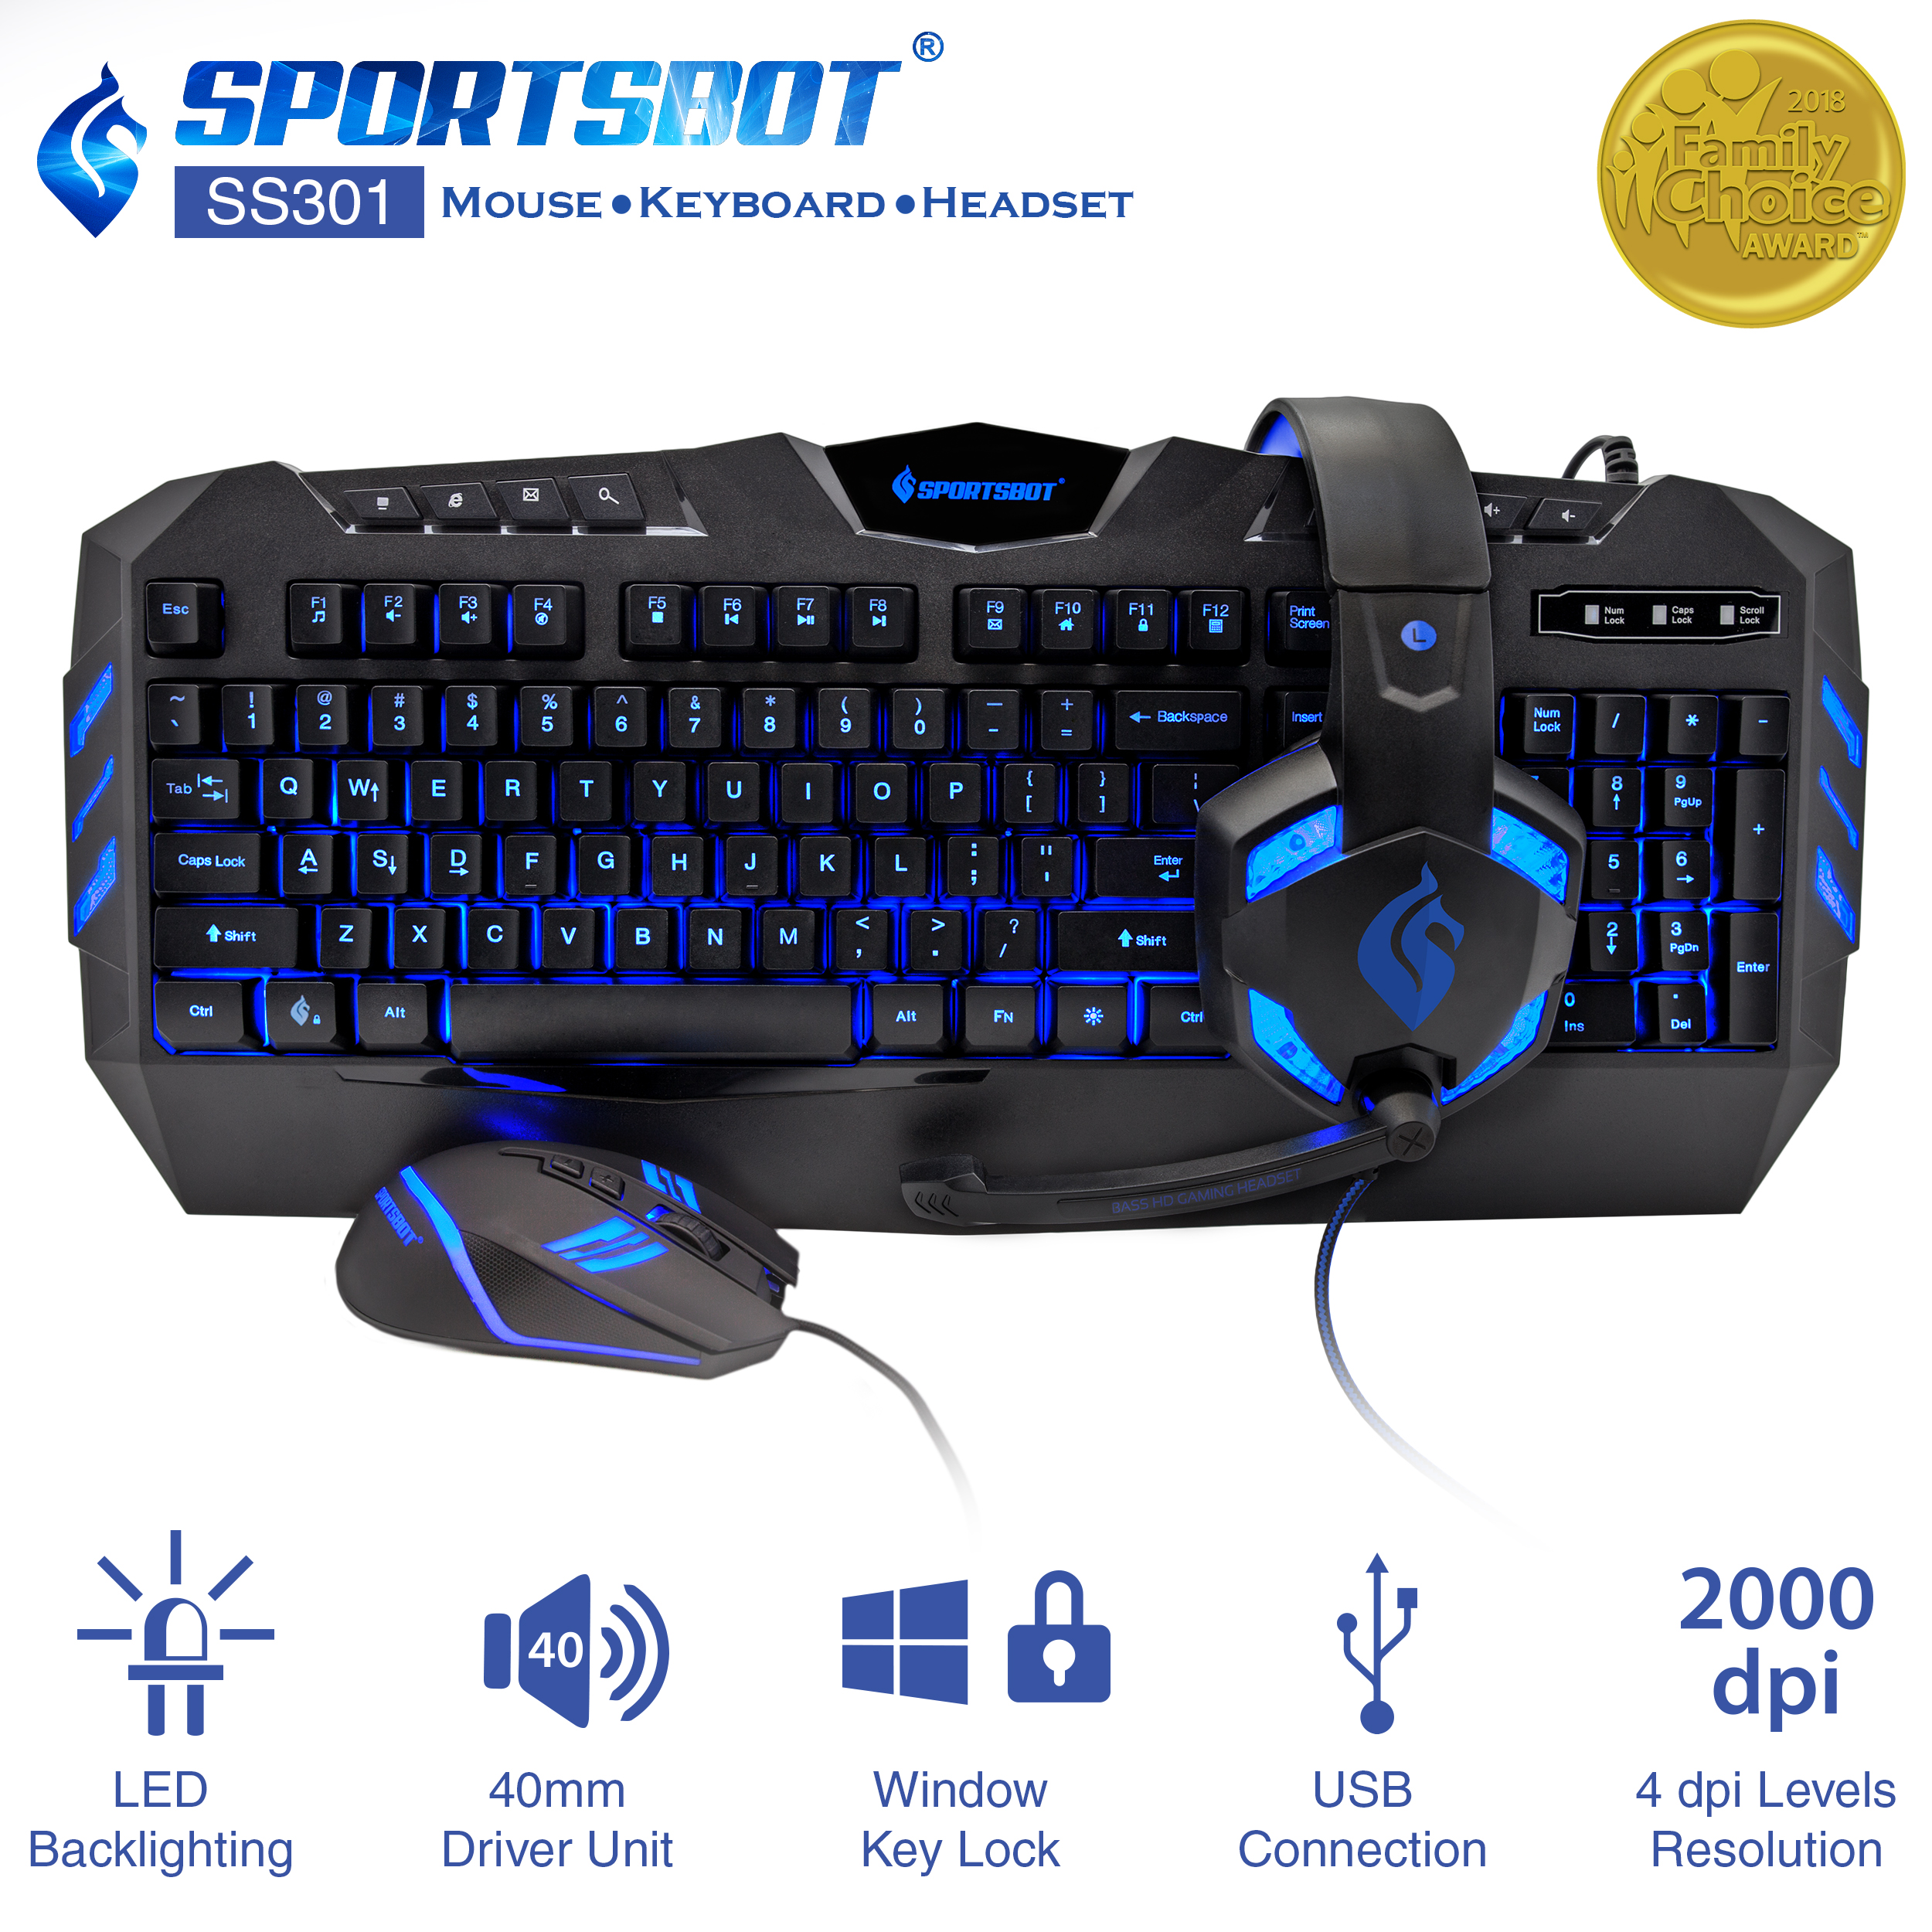 Sportsbot SS301 Blue LED Gaming Over-Ear Headset, Keyboard & Mouse Combo Set - image 1 of 10